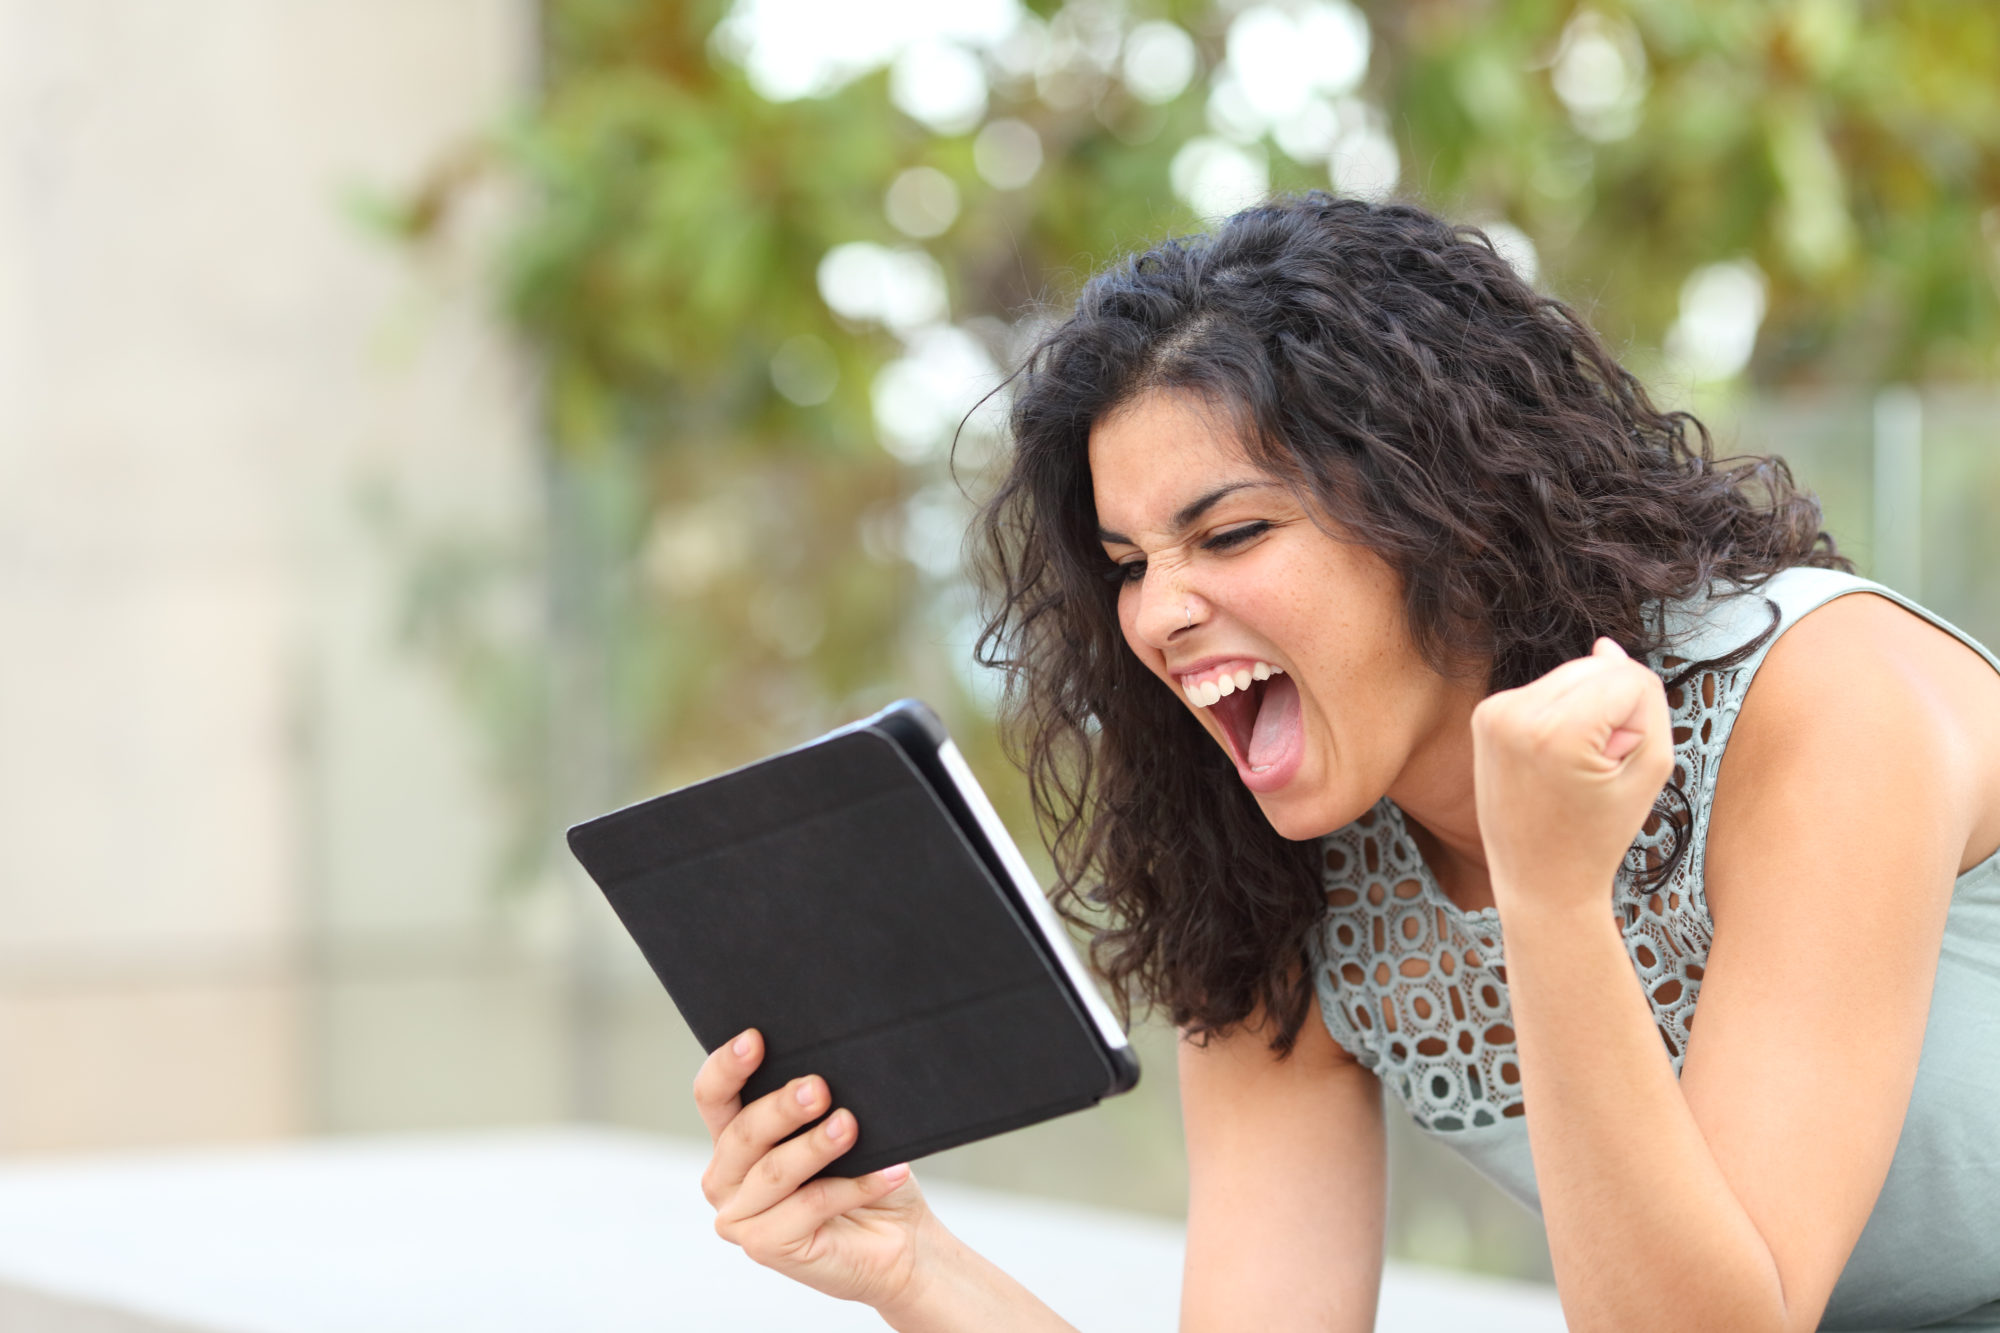 Excited girl holding a tablet and making a fist in celebration